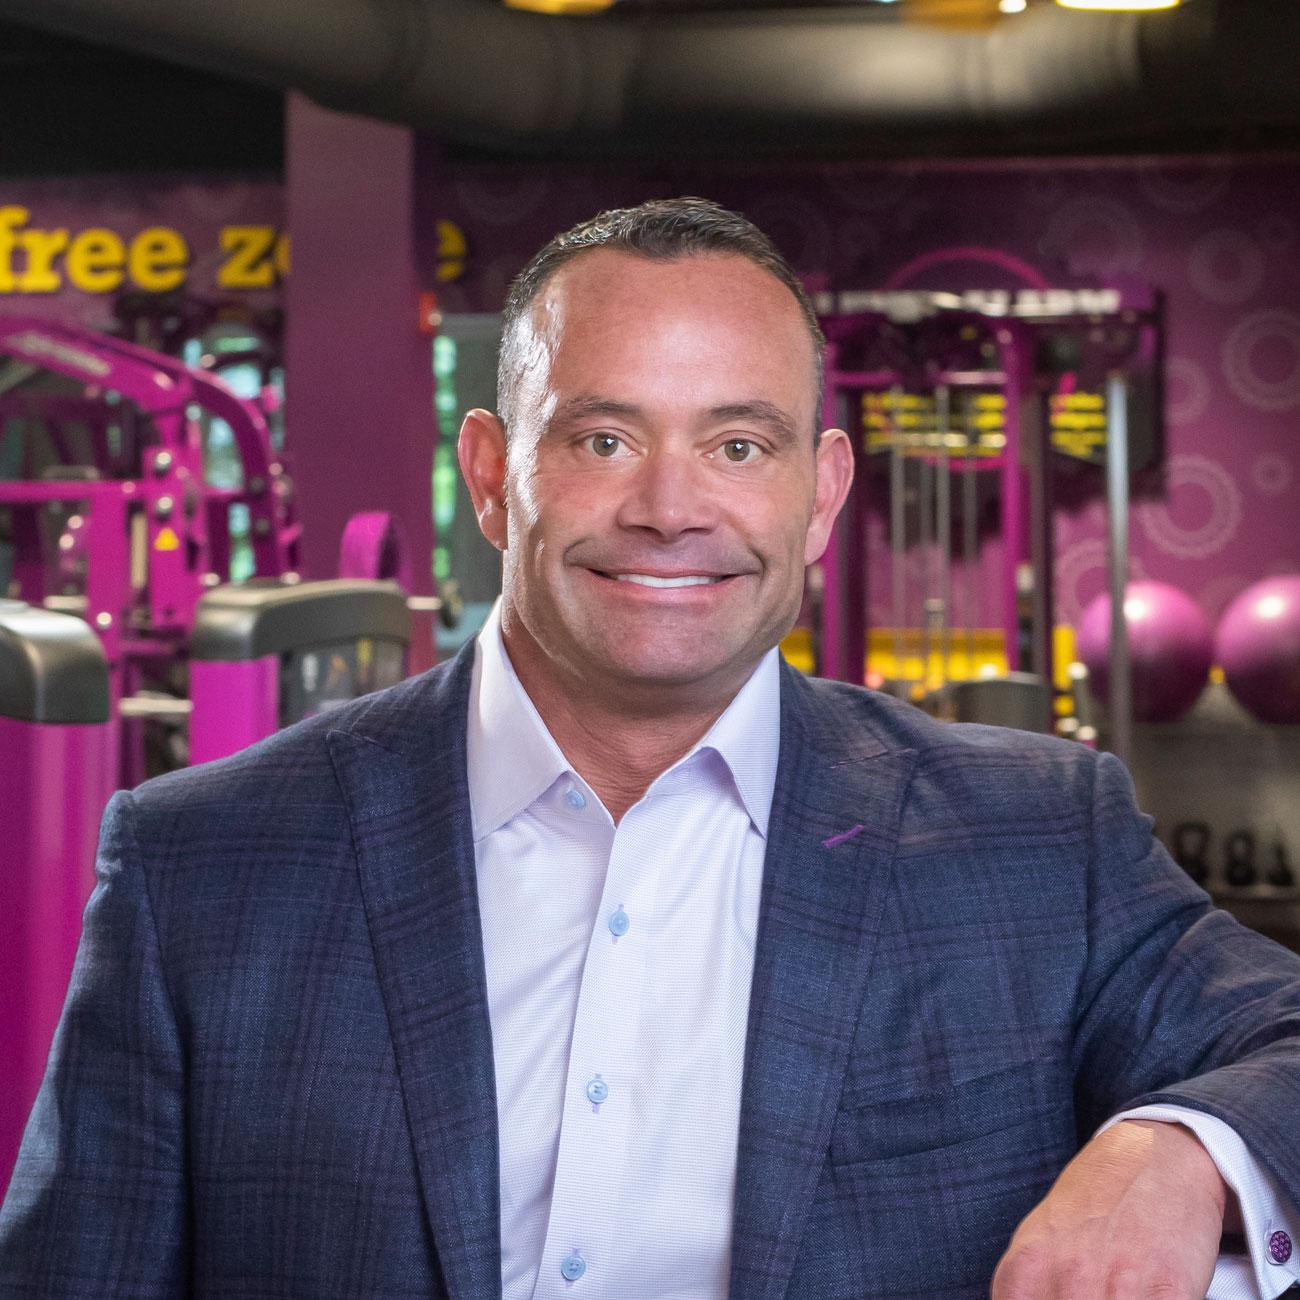 Planet Fitness Announces Nationwide New Year Membership Offer